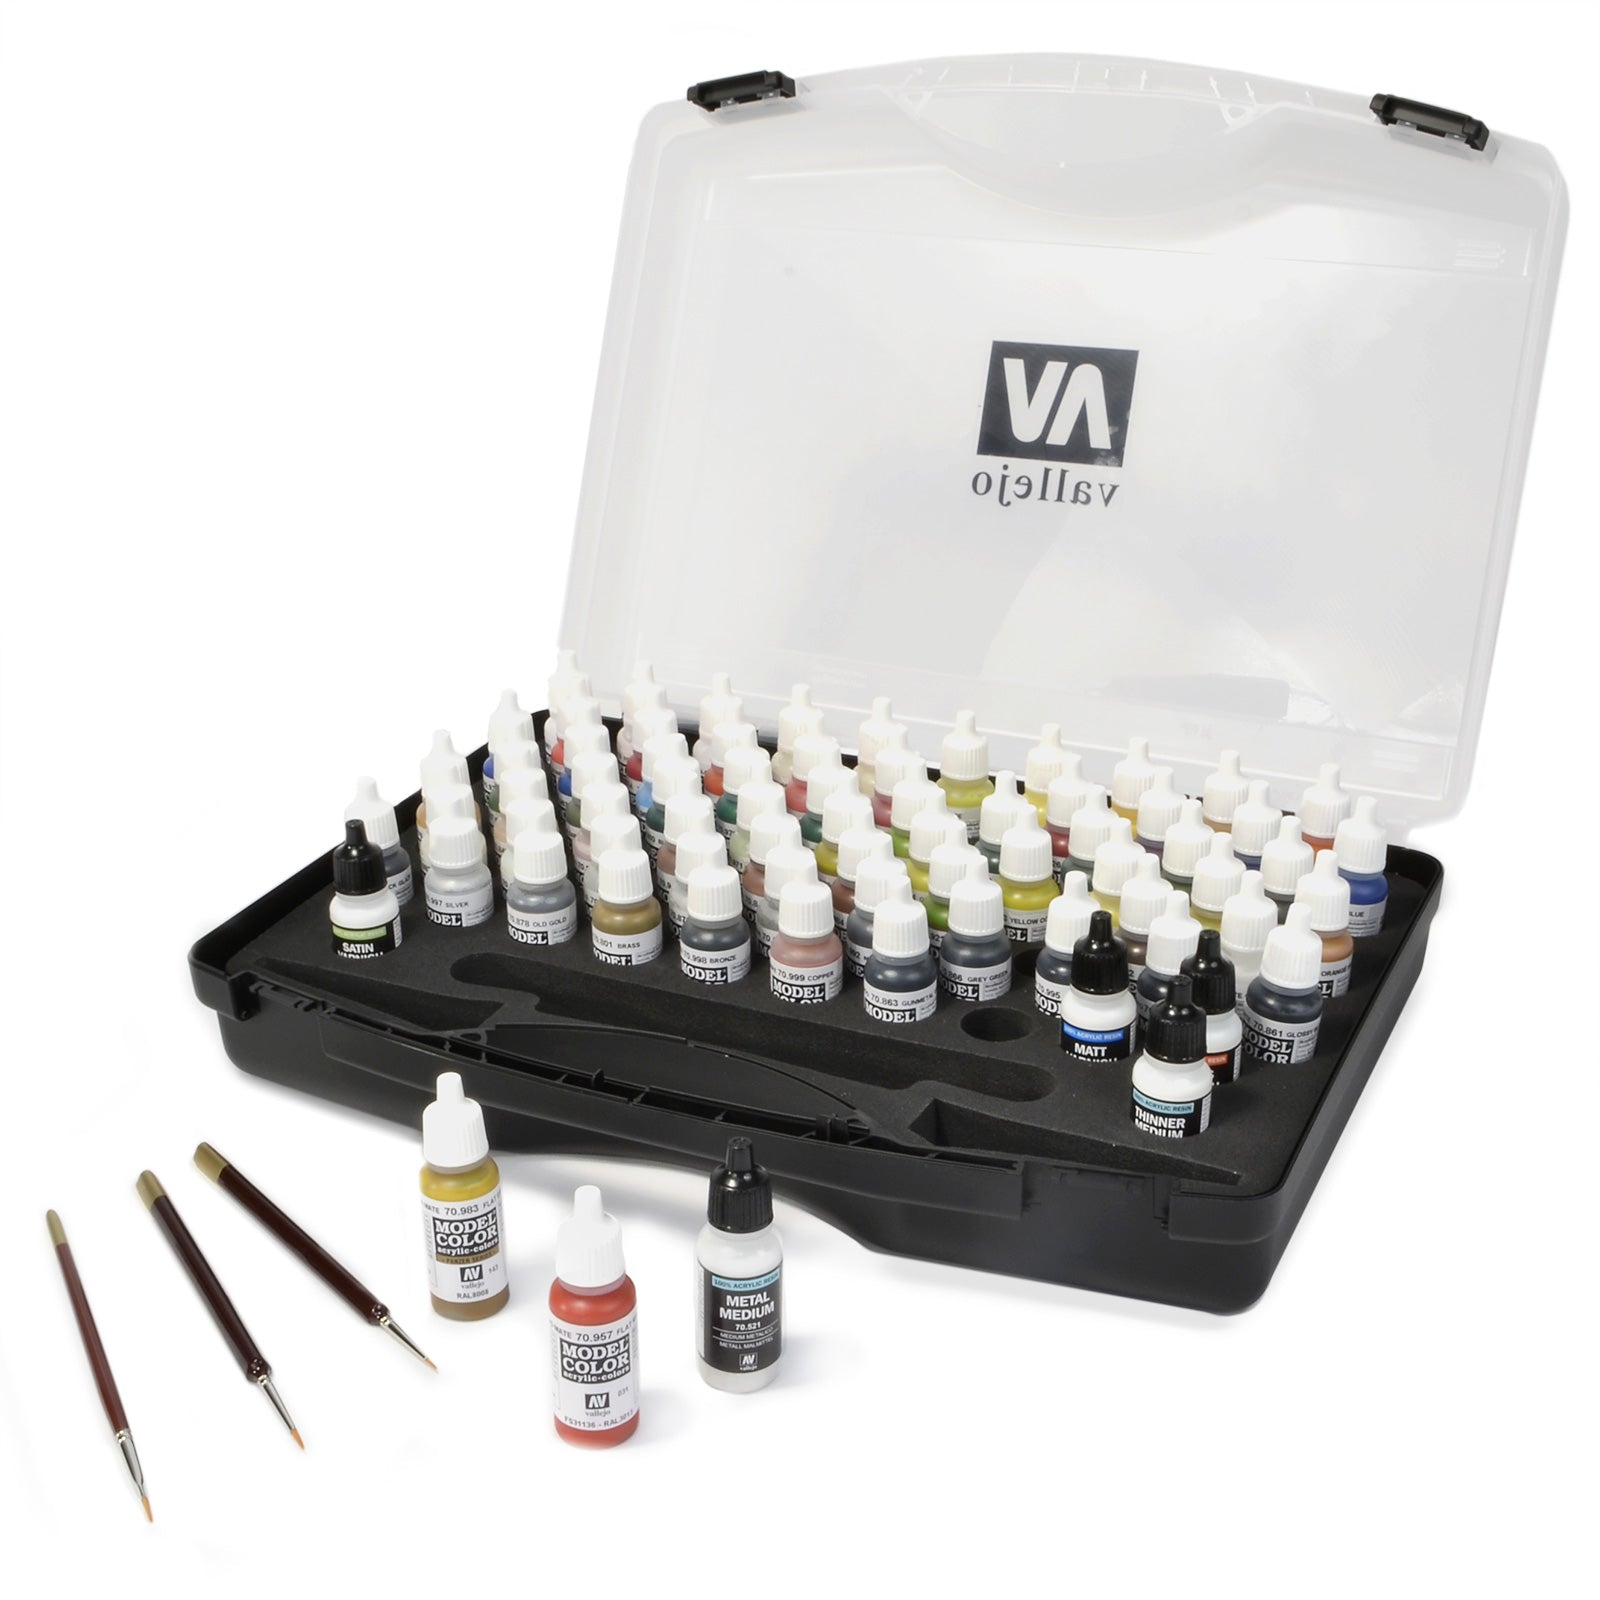 Acrylicos Vallejo Military Colors Model Paint Set, with Case and Brushes, 72 Colors - Micro - Mark Acrylic Paint